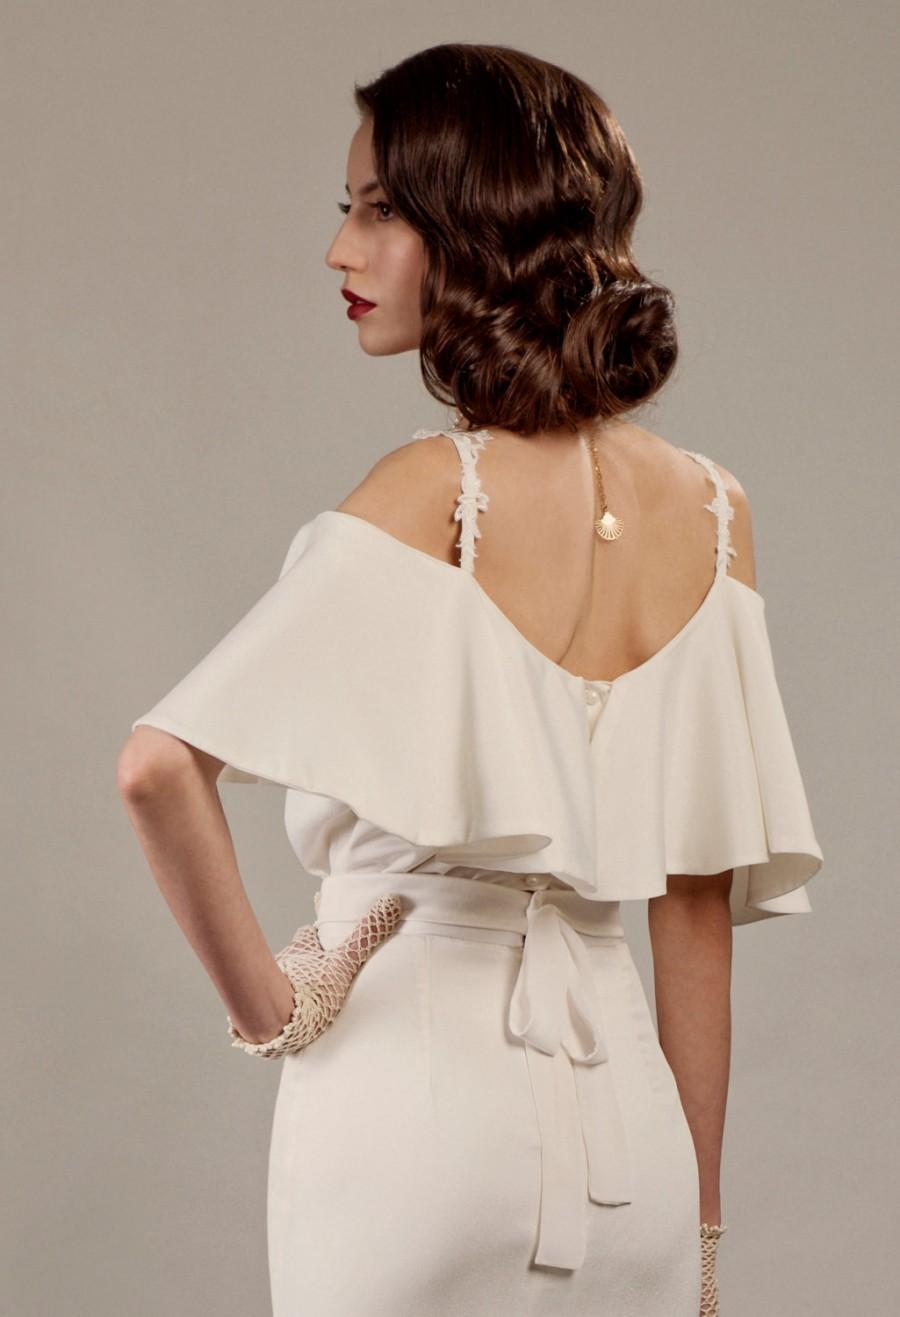 Wedding - Veronica two piece unique wedding dress ensemble in ivory glamorous 30's Hollywood vintage inspired